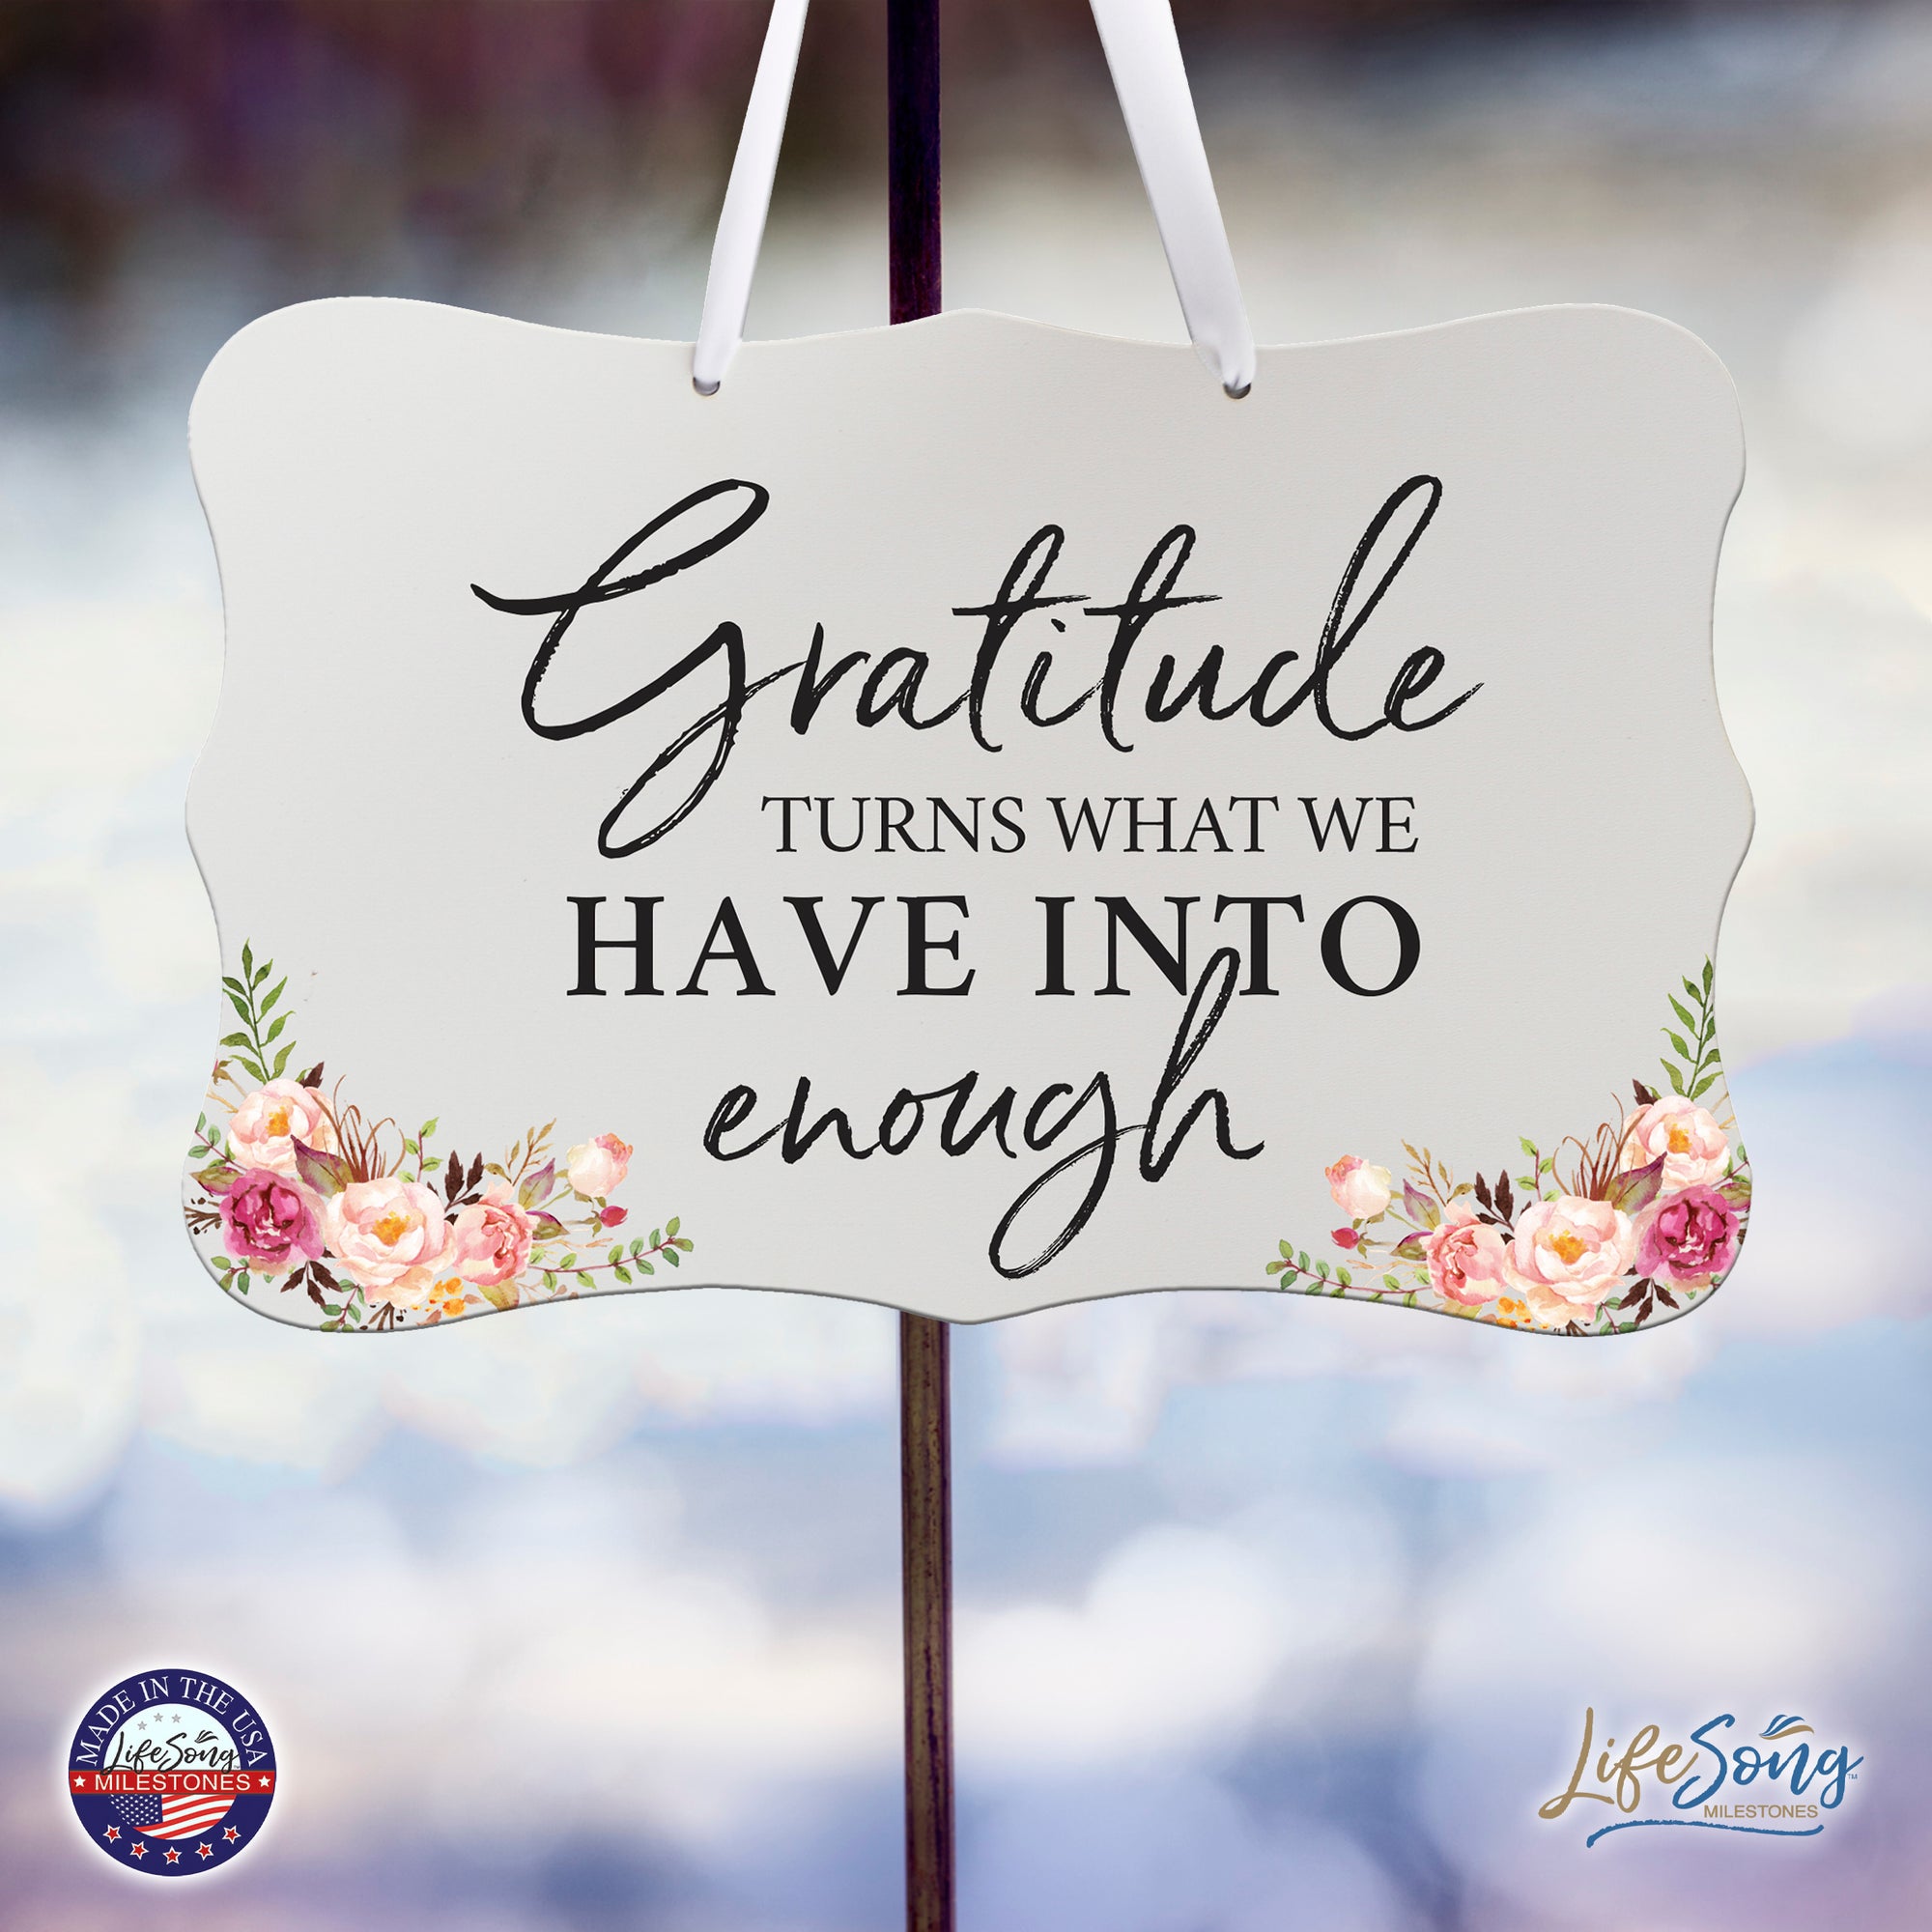 Wooden Wall Hanging Sign for Home Decorations 8x12 - Gratitude Turns